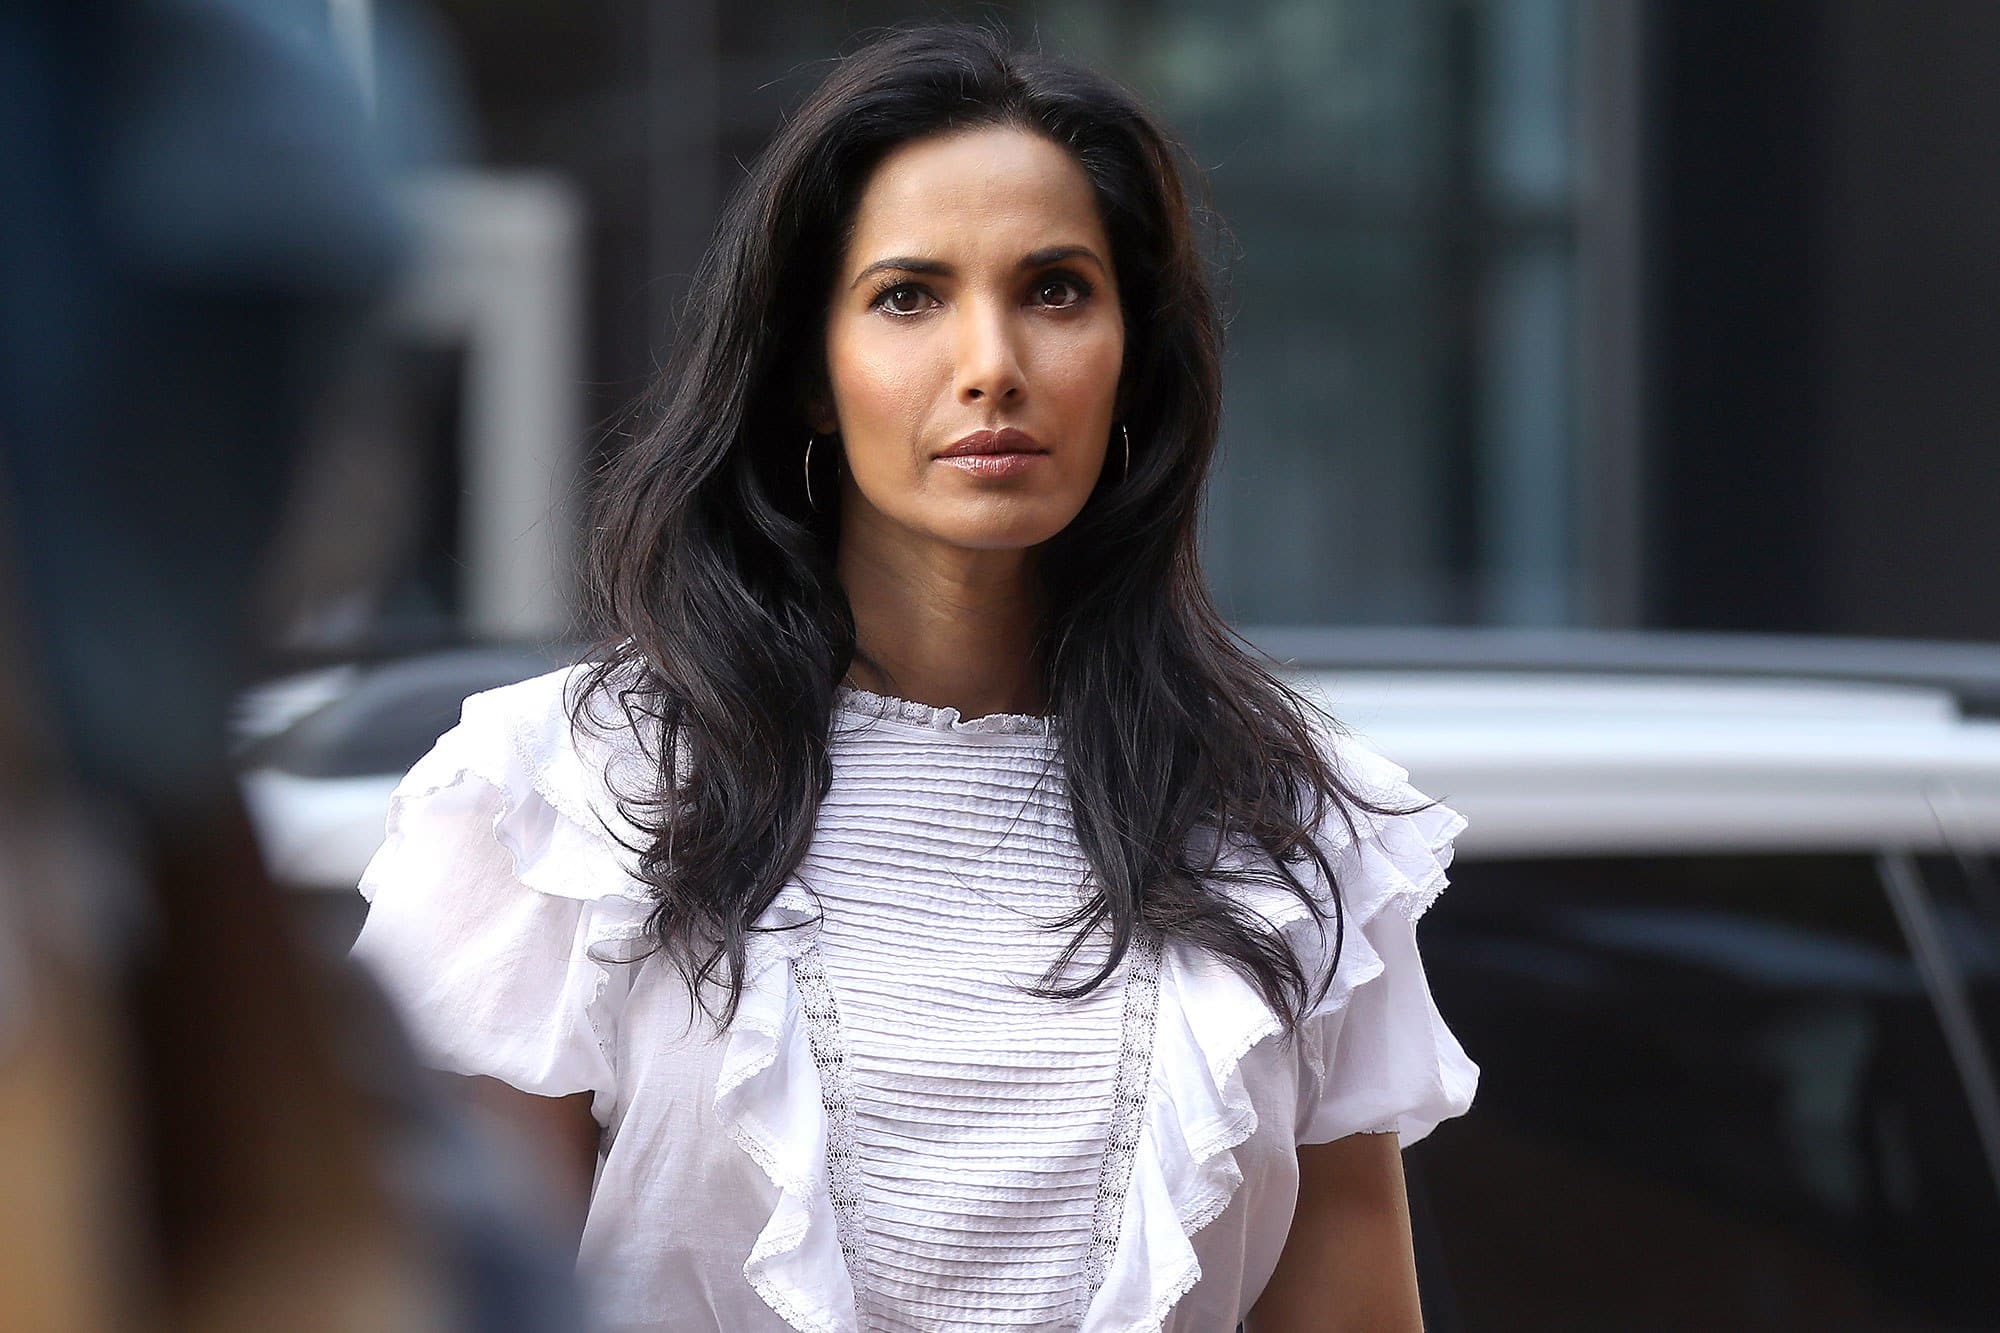 Padma Lakshmi 1 Arena Pile Top 10 Hottest Female Chefs In The World